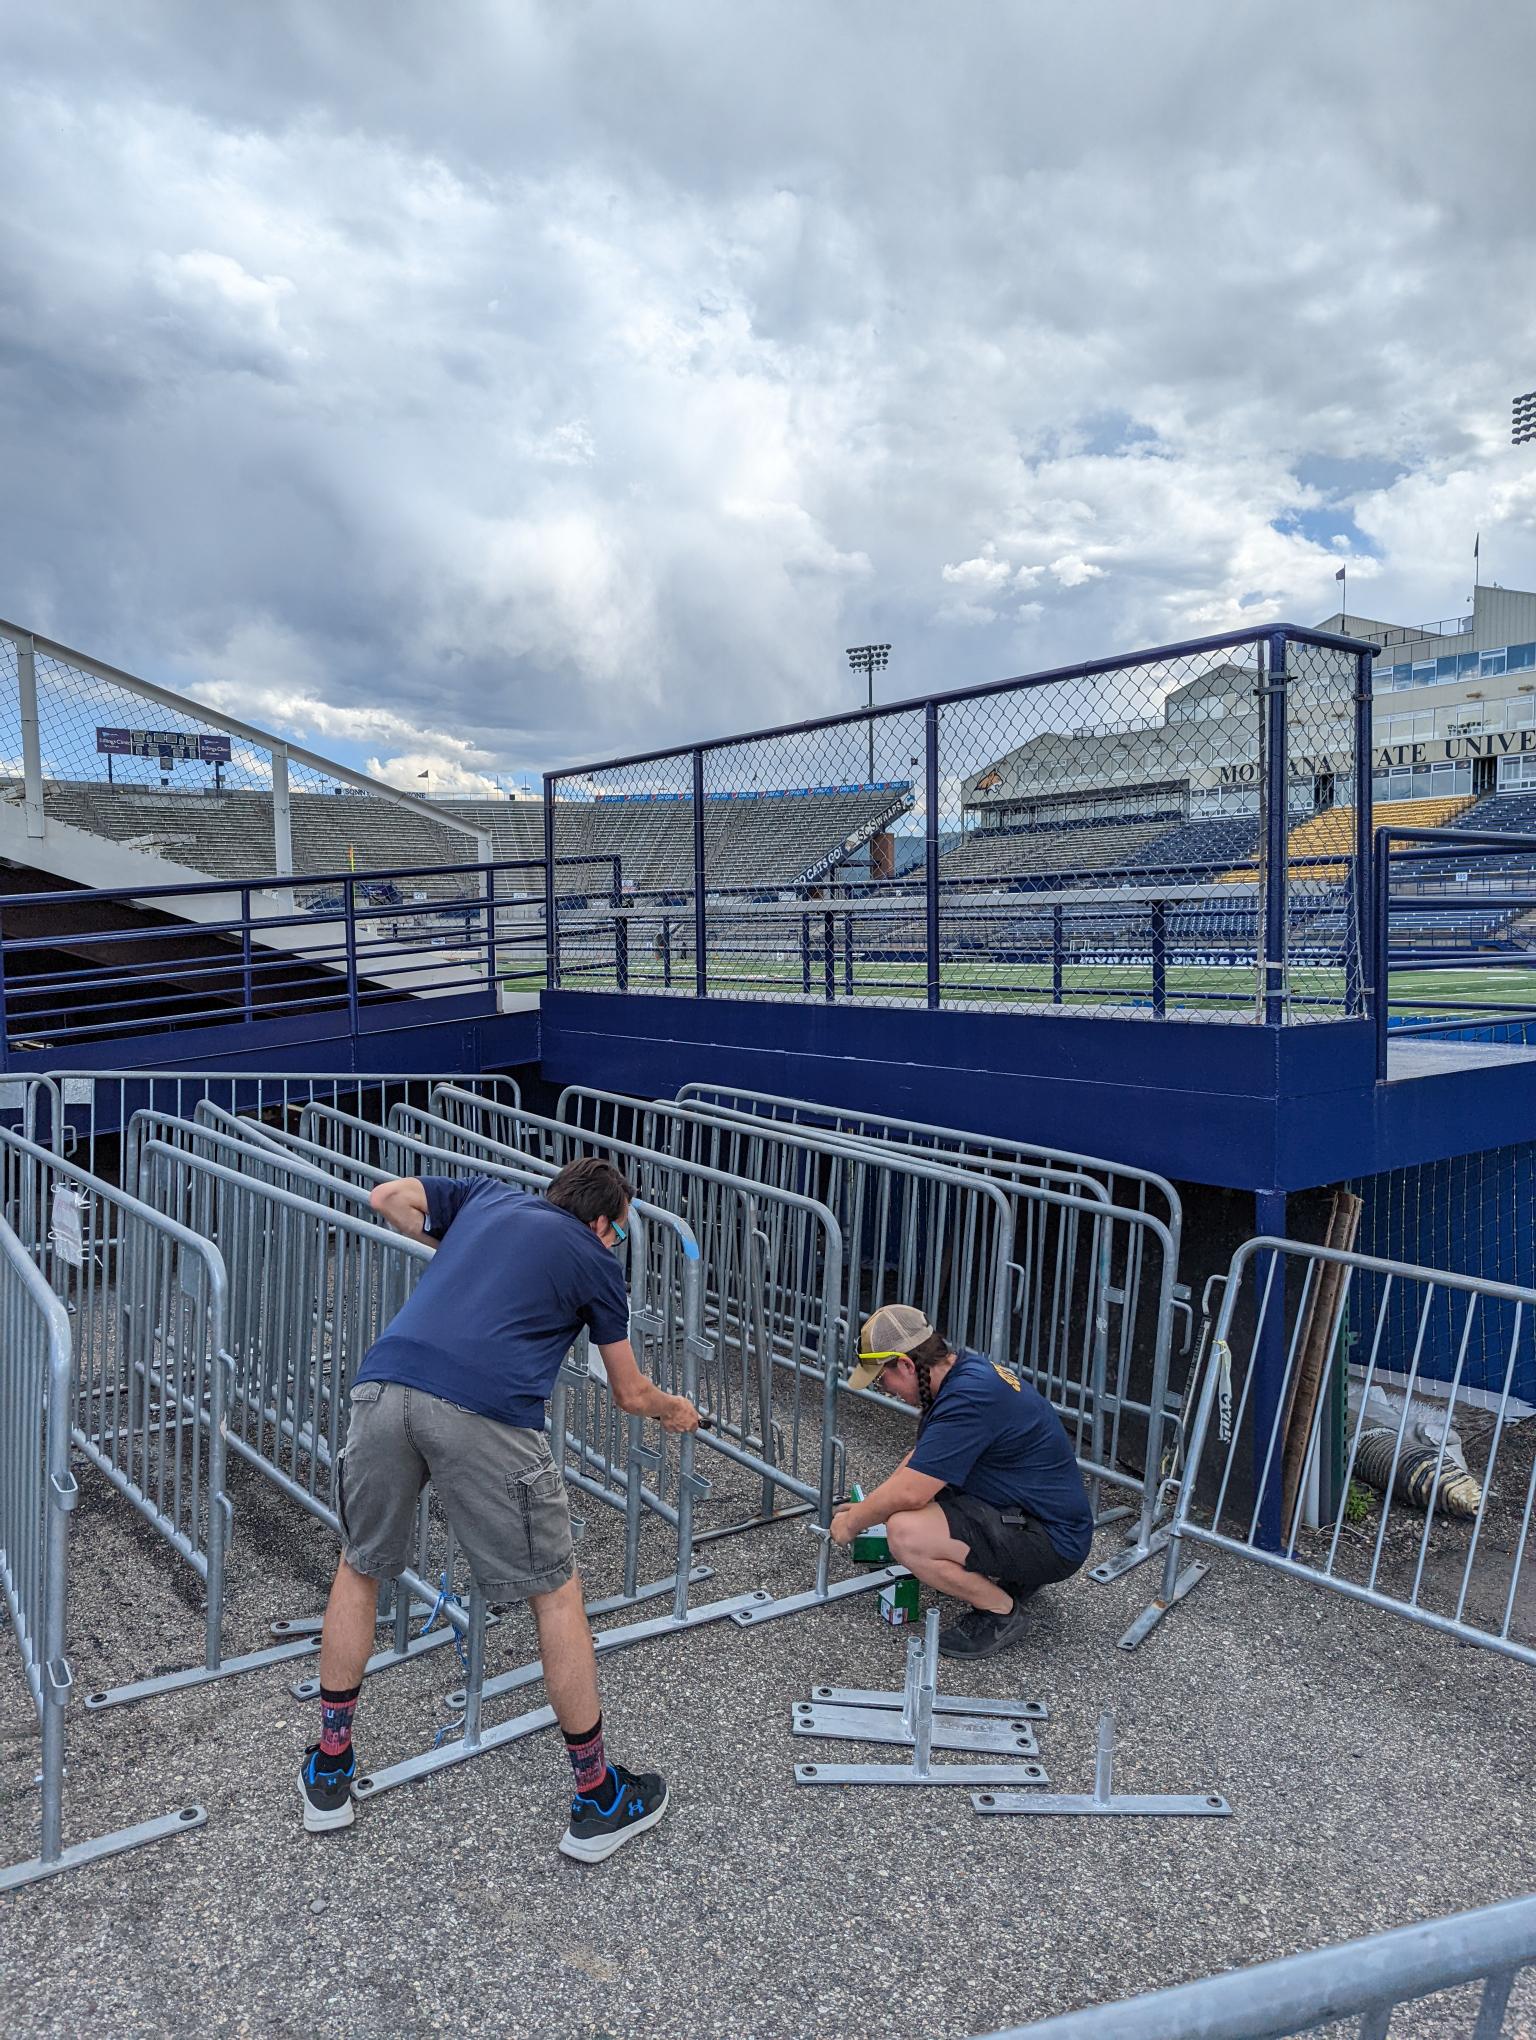 Student employees helping put fences up at football game